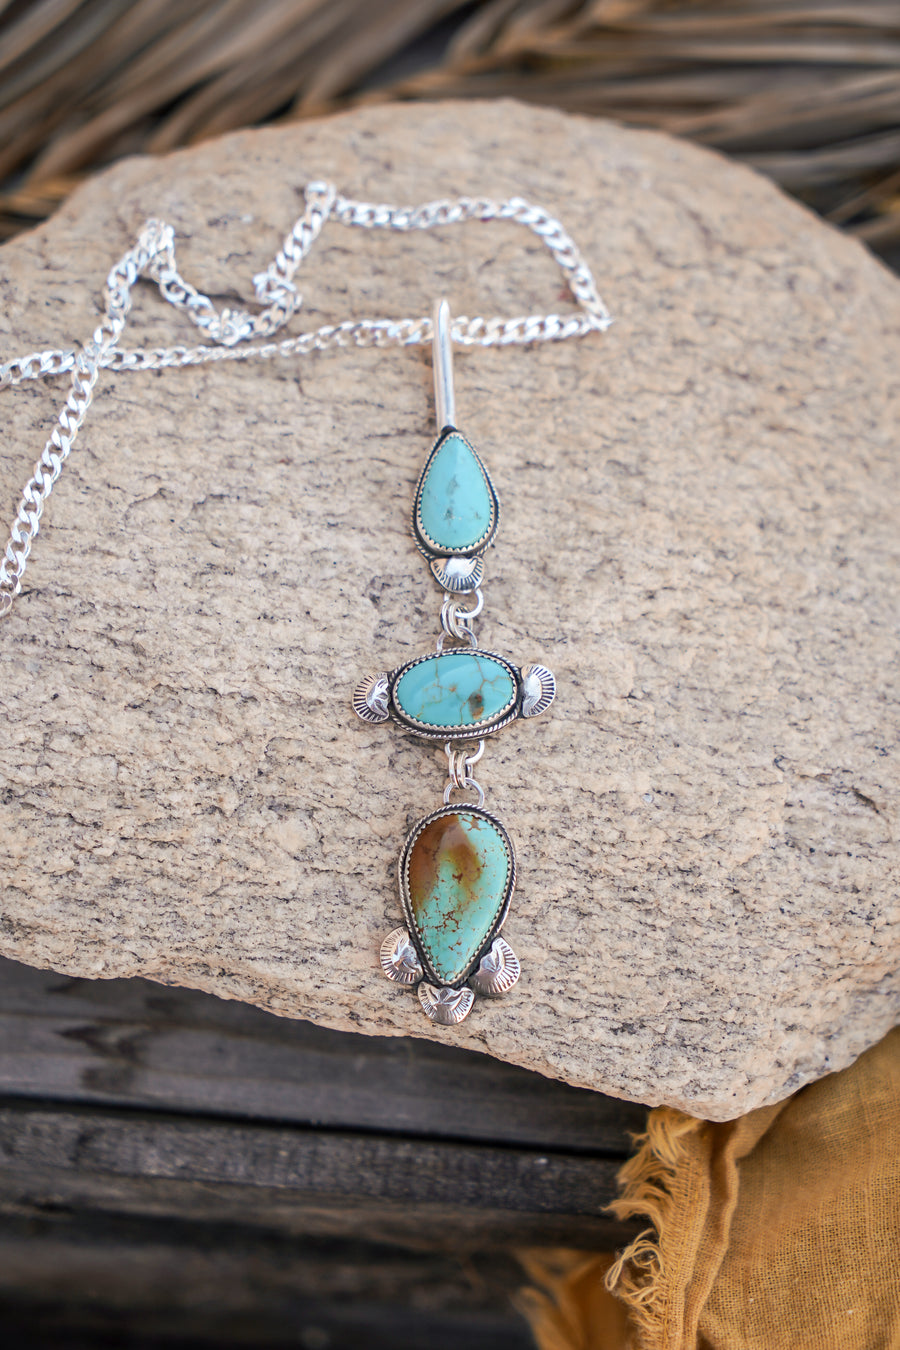 Statement Necklace in Turquoise